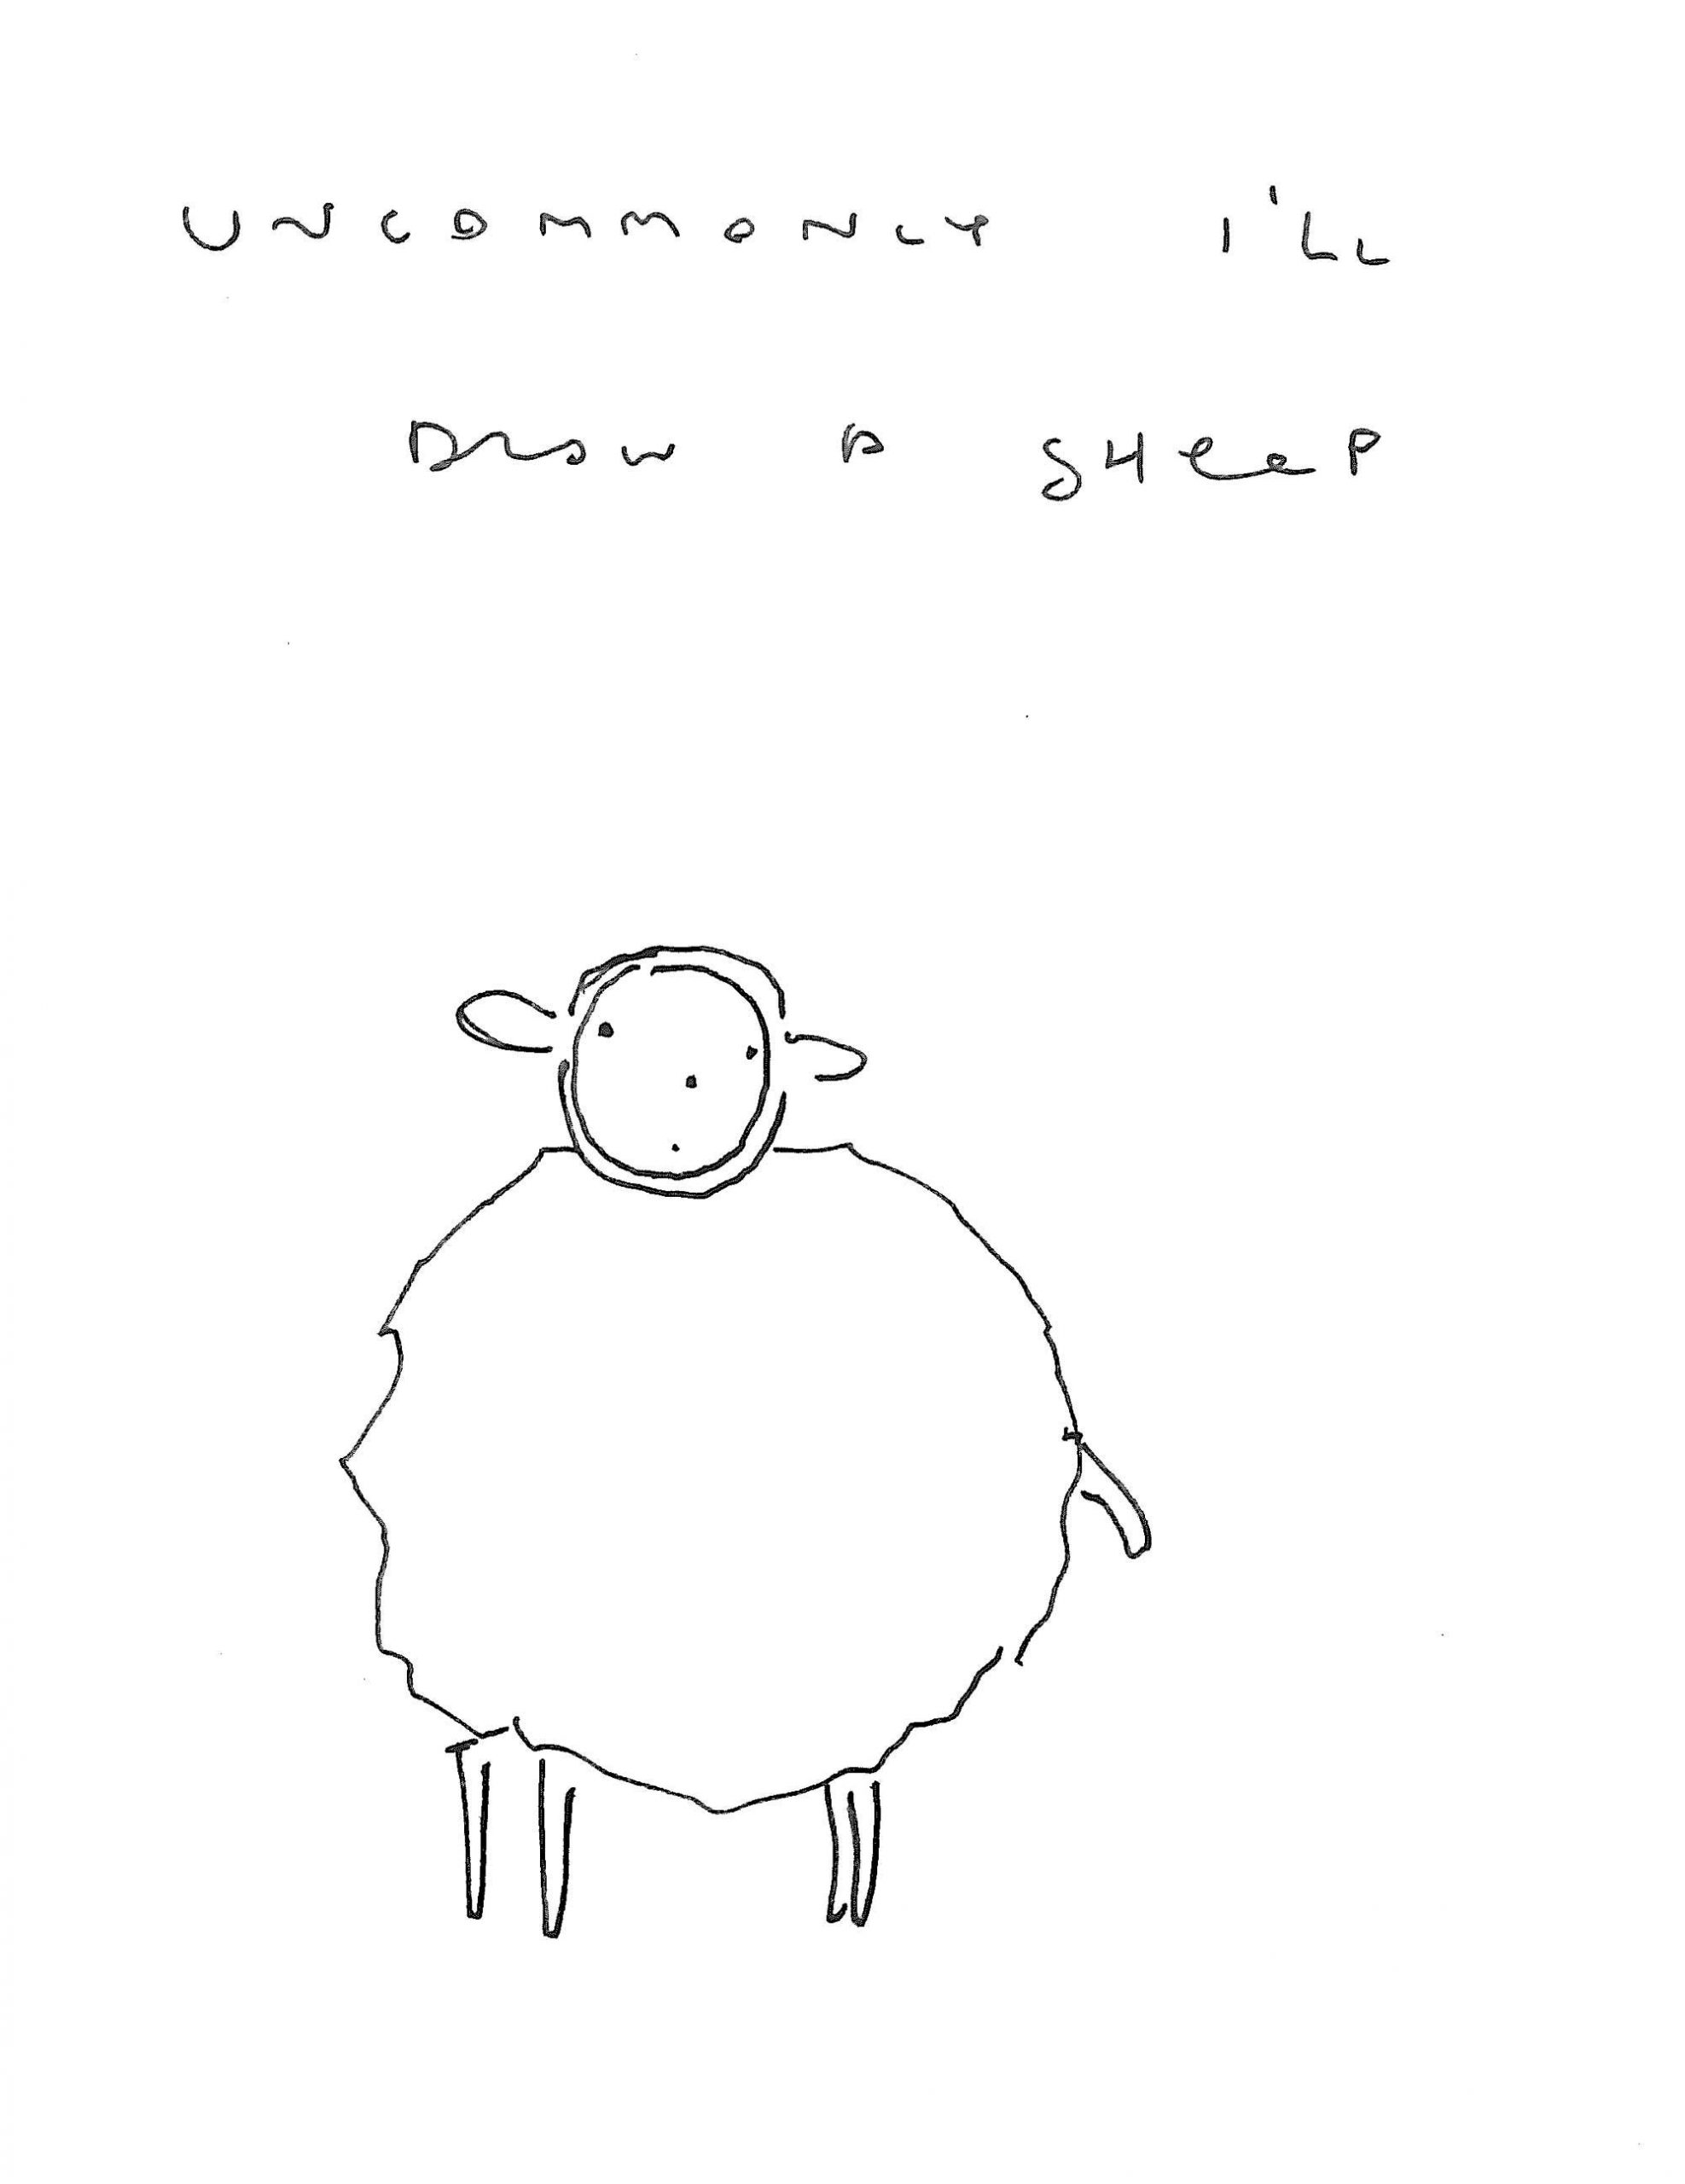 Jesse Ball | Drawings of Monsters | 9 sheep